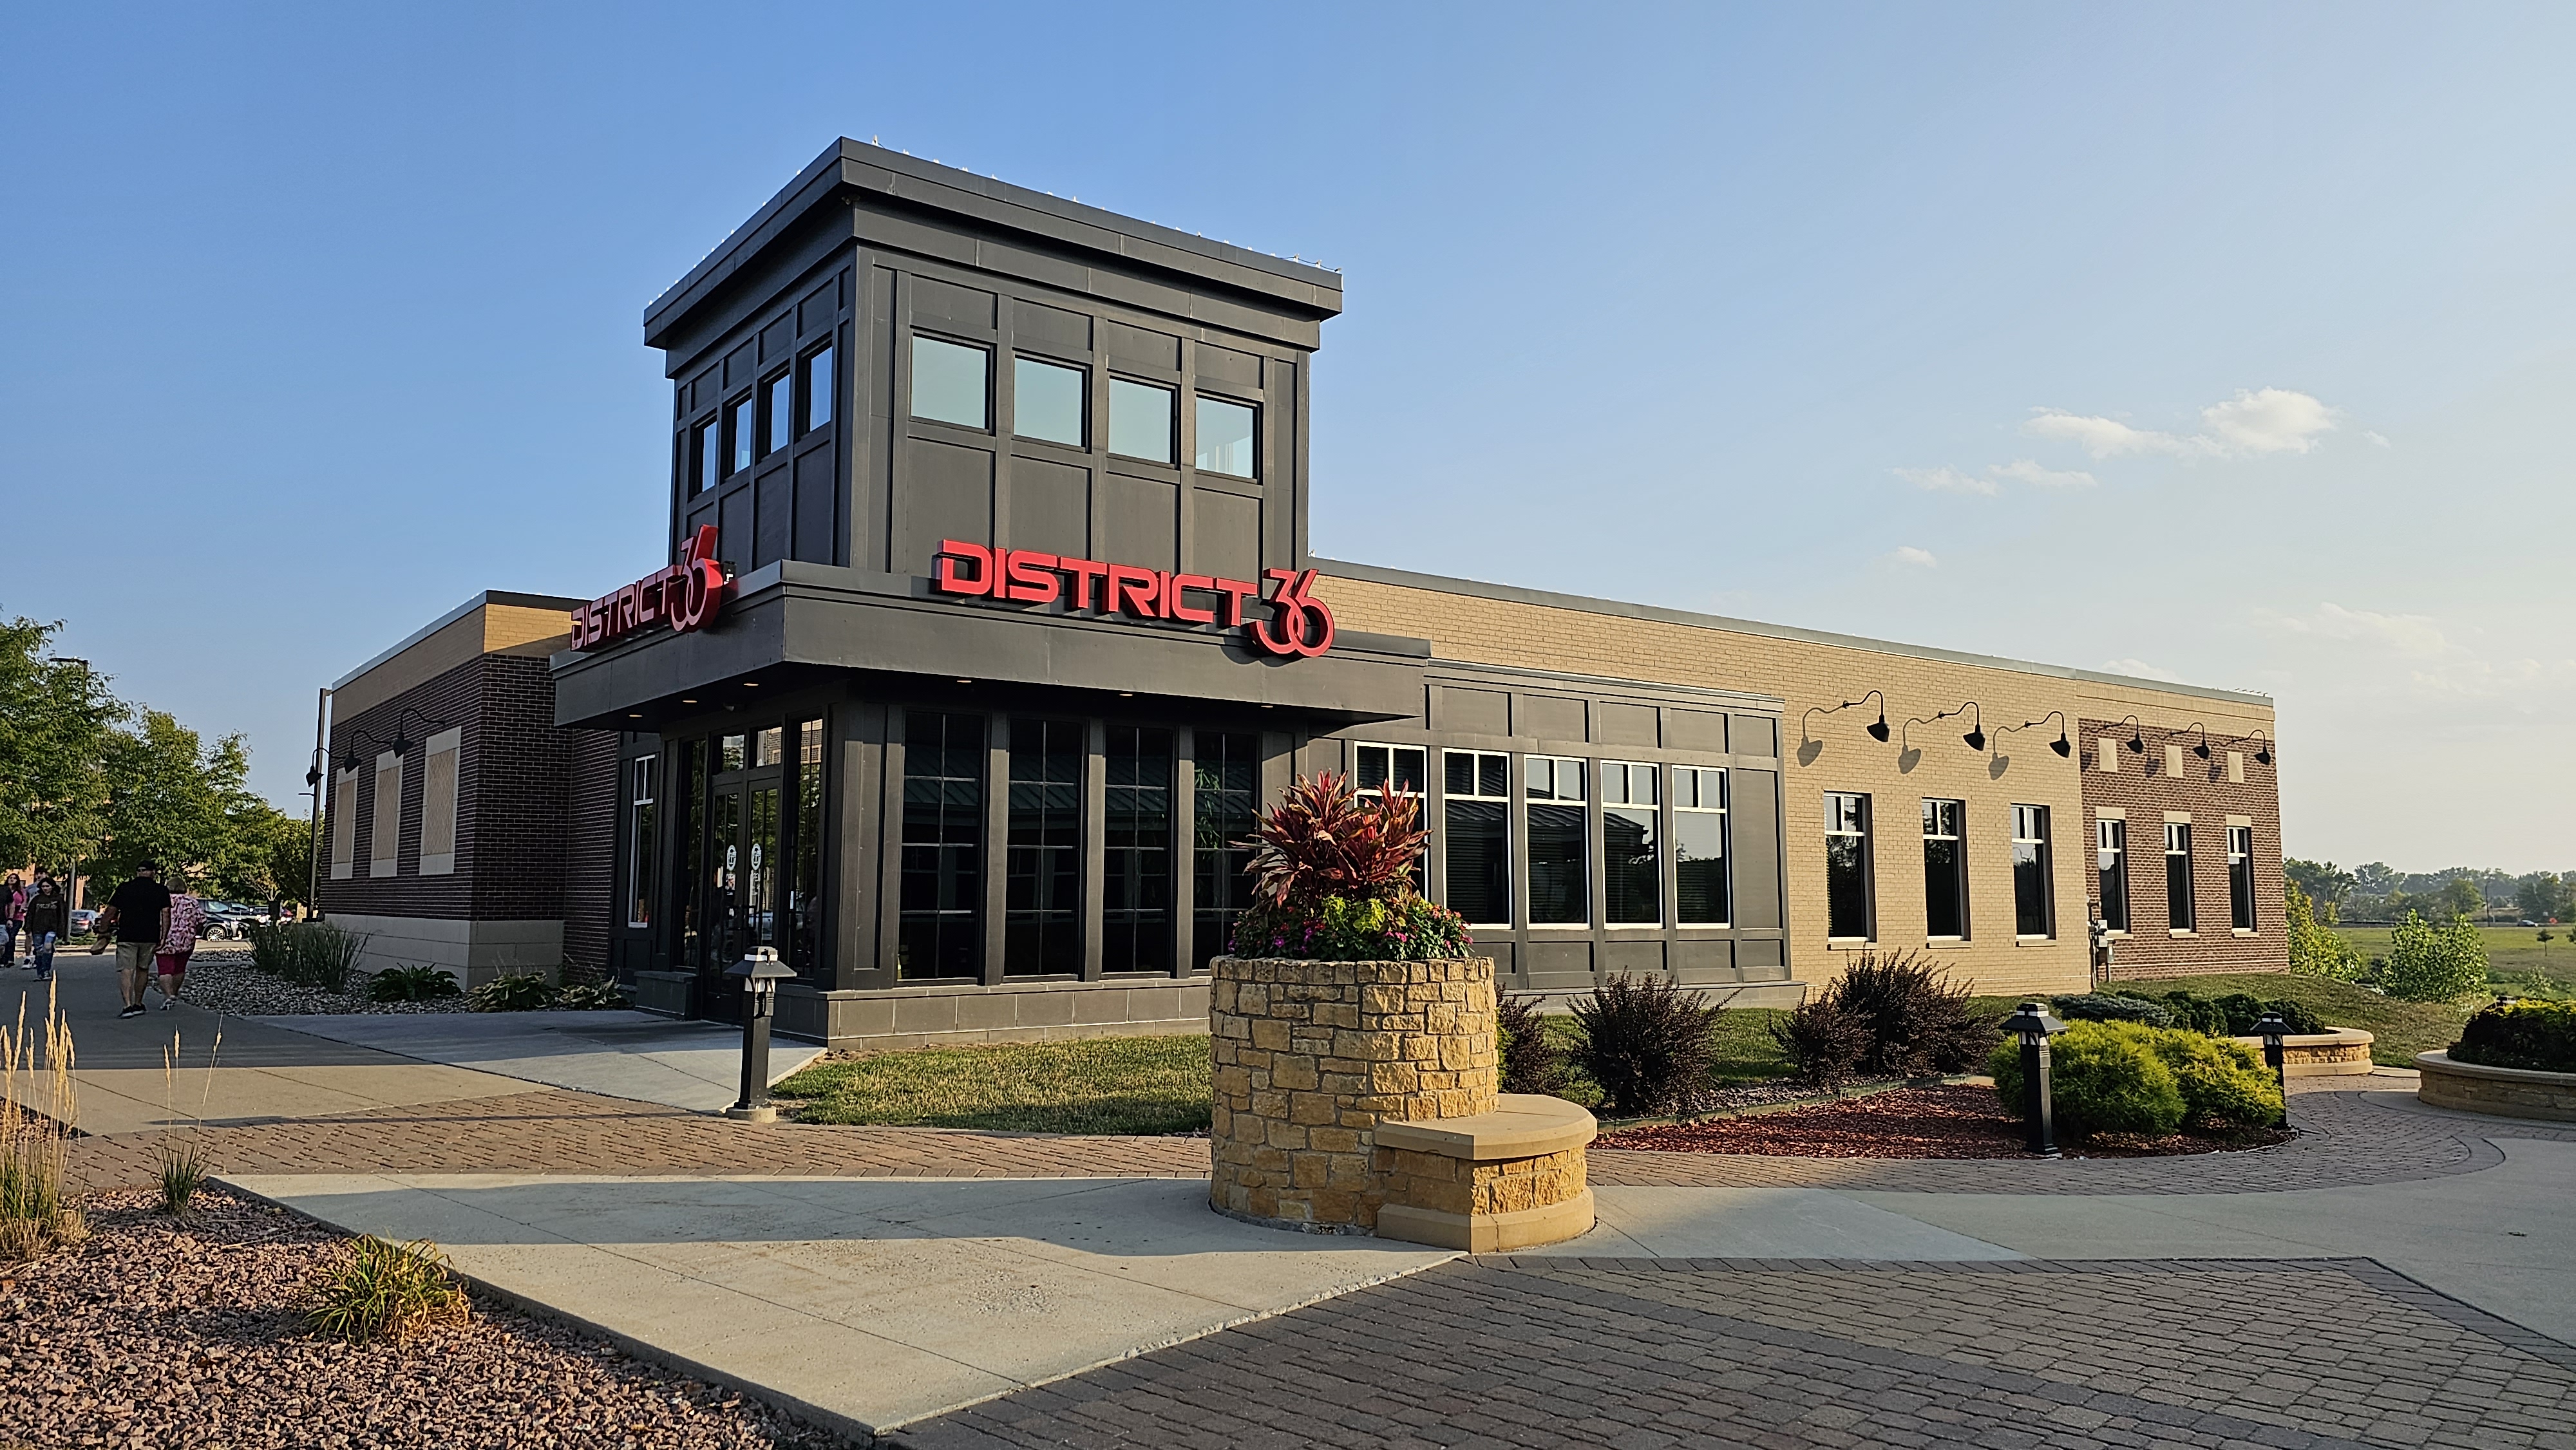 District 36 Wine Bar & Grille (Ankeny)